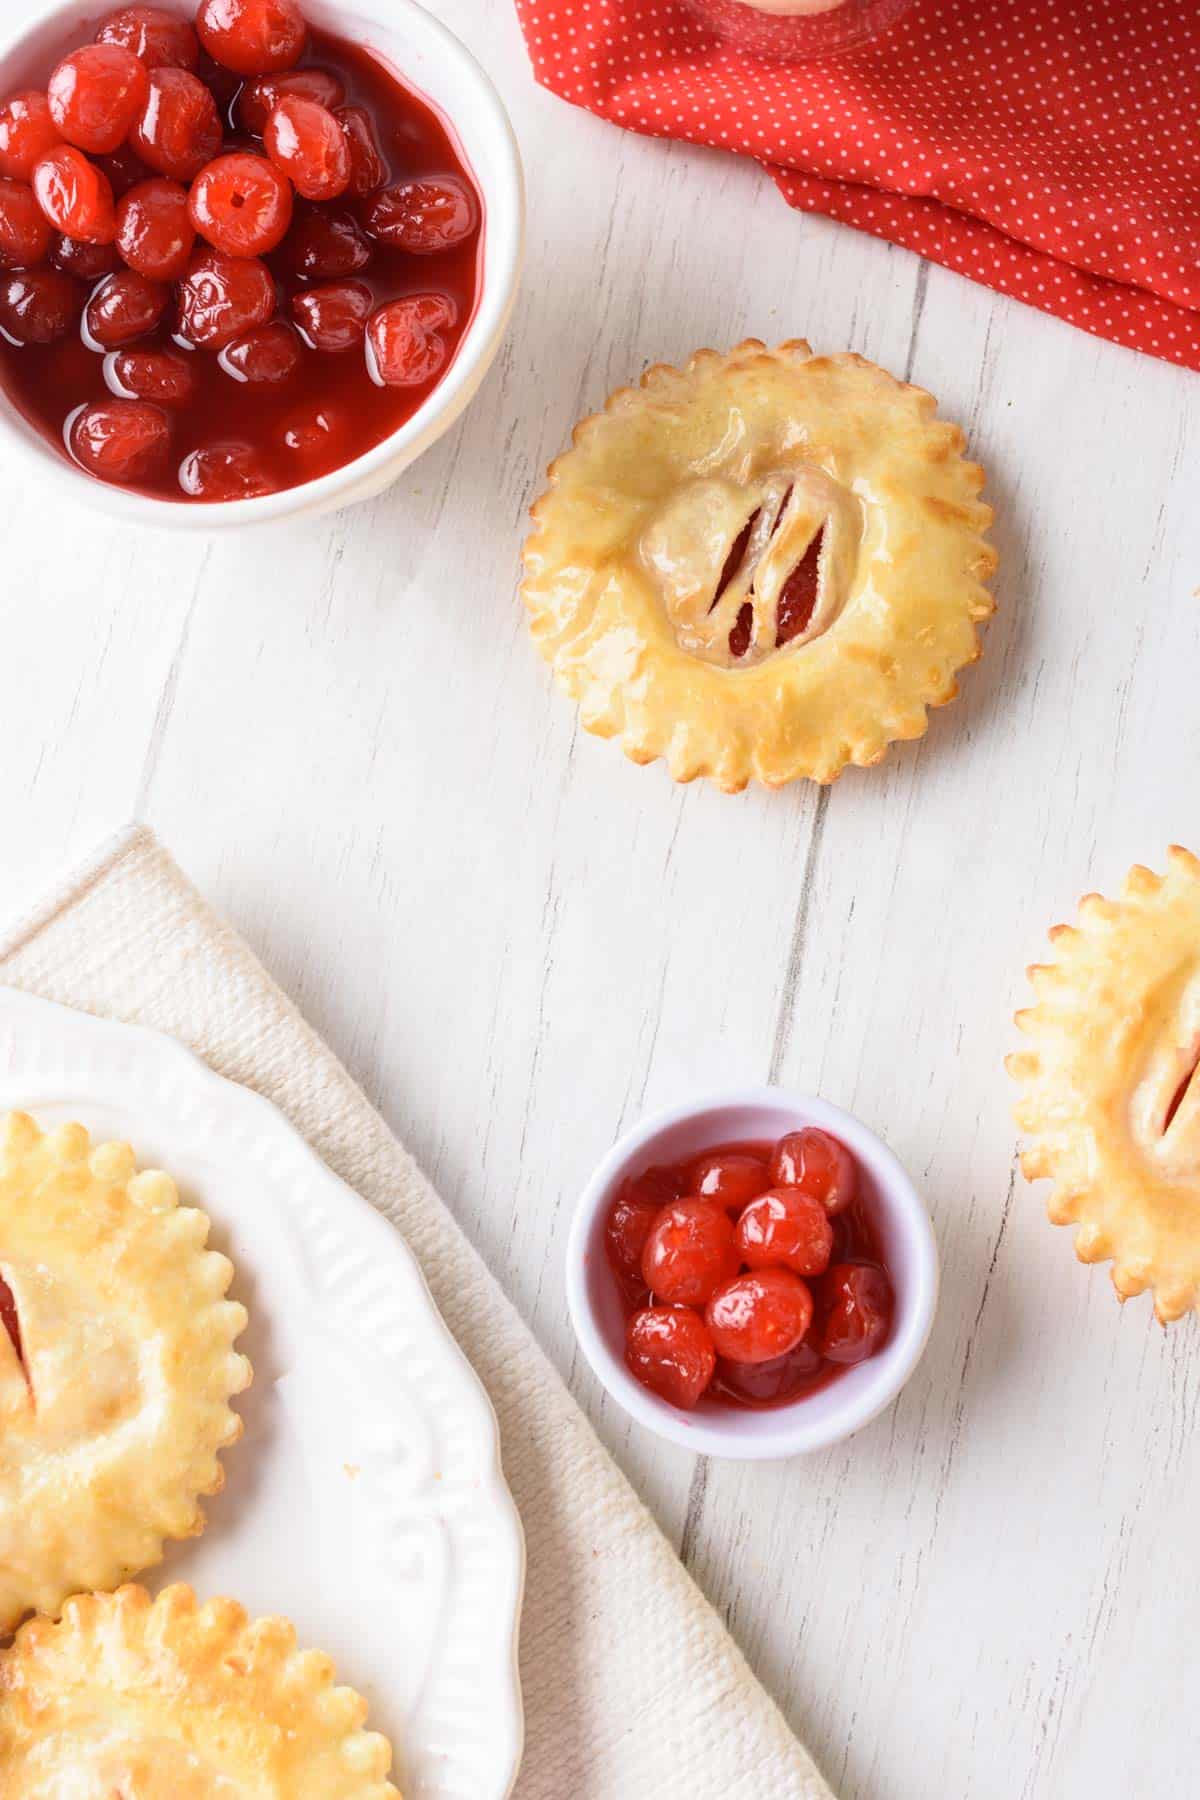 A white wooden table set with a plate of cherry hand pies, a bowls of cherry pie filling and a bright red napkin.